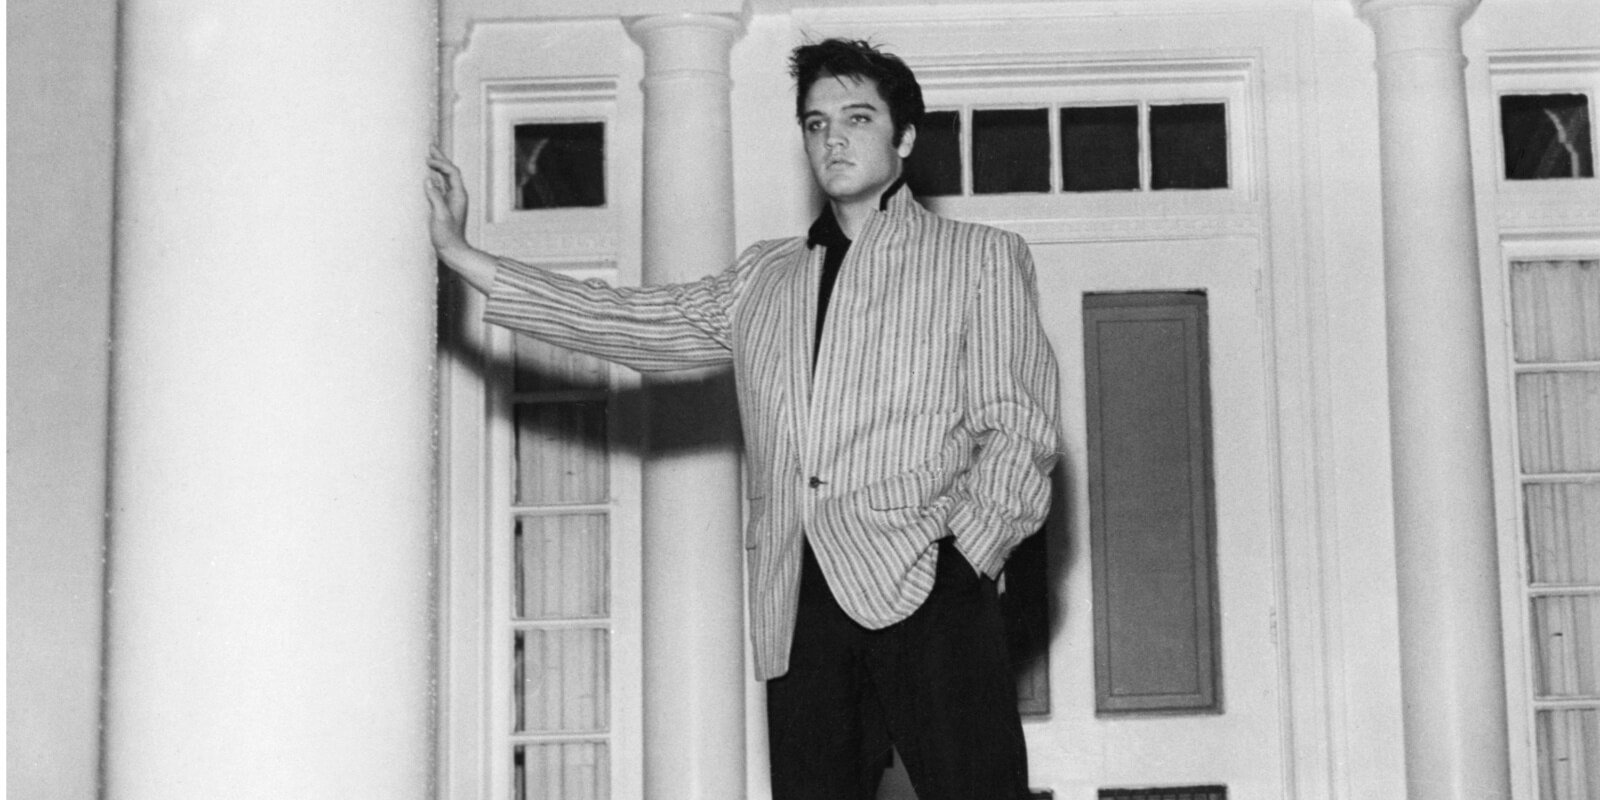 Elvis Presley leans on a column in front of his Graceland home in Memphis, TN.